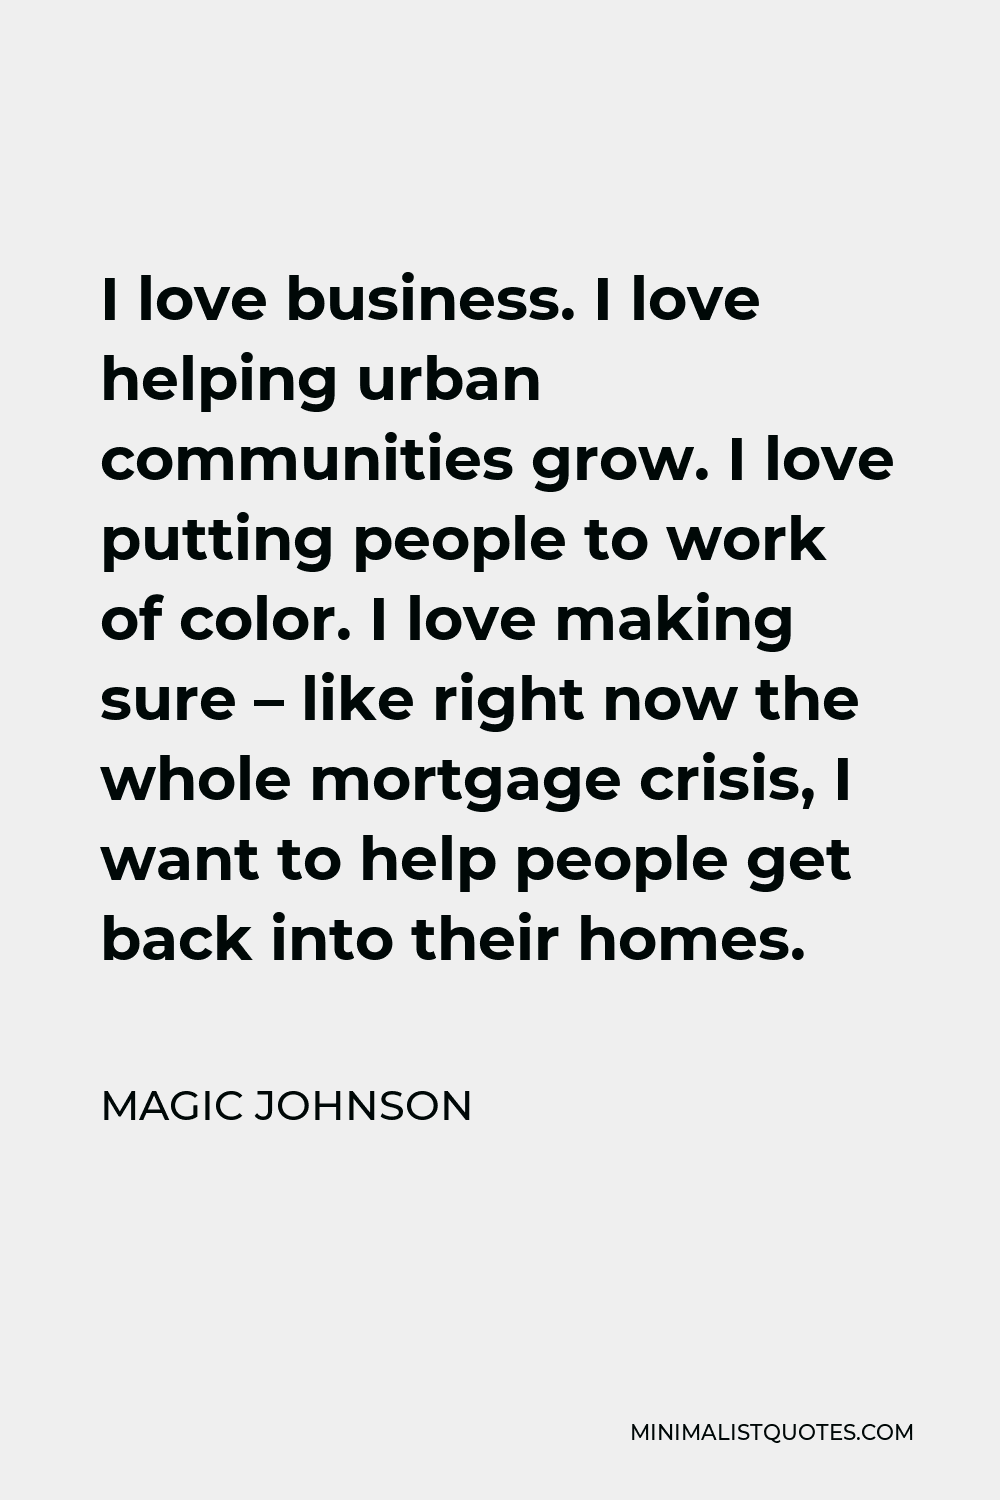 Magic Johnson Quote - I love business. I love helping urban communities grow. I love putting people to work of color. I love making sure – like right now the whole mortgage crisis, I want to help people get back into their homes.